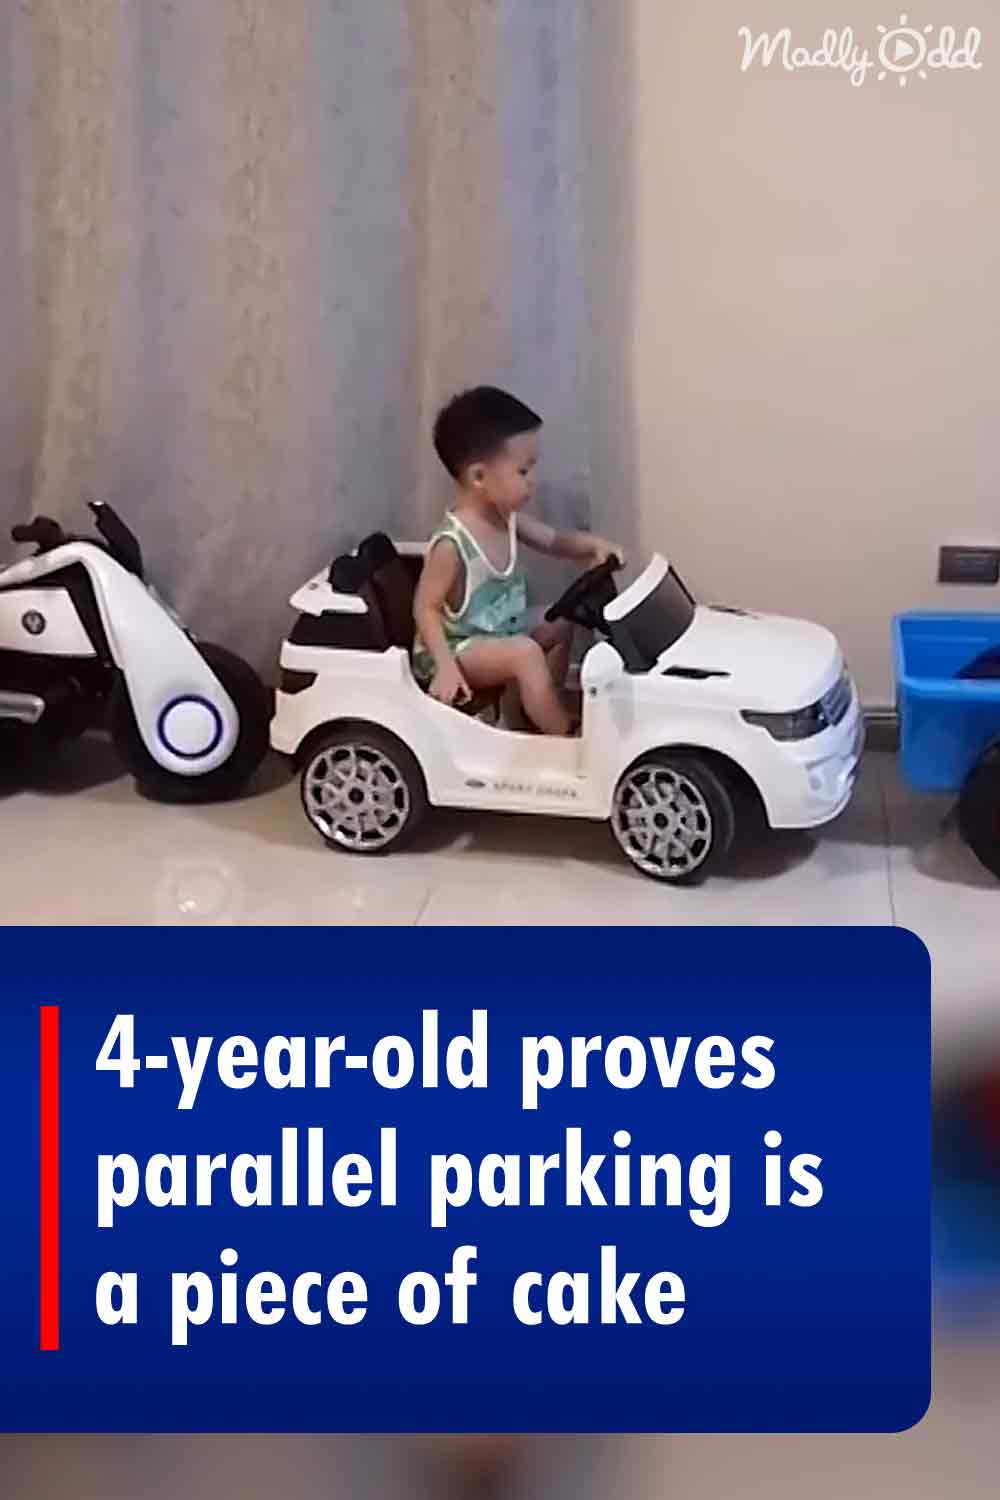 4-year-old proves parallel parking is a piece of cake